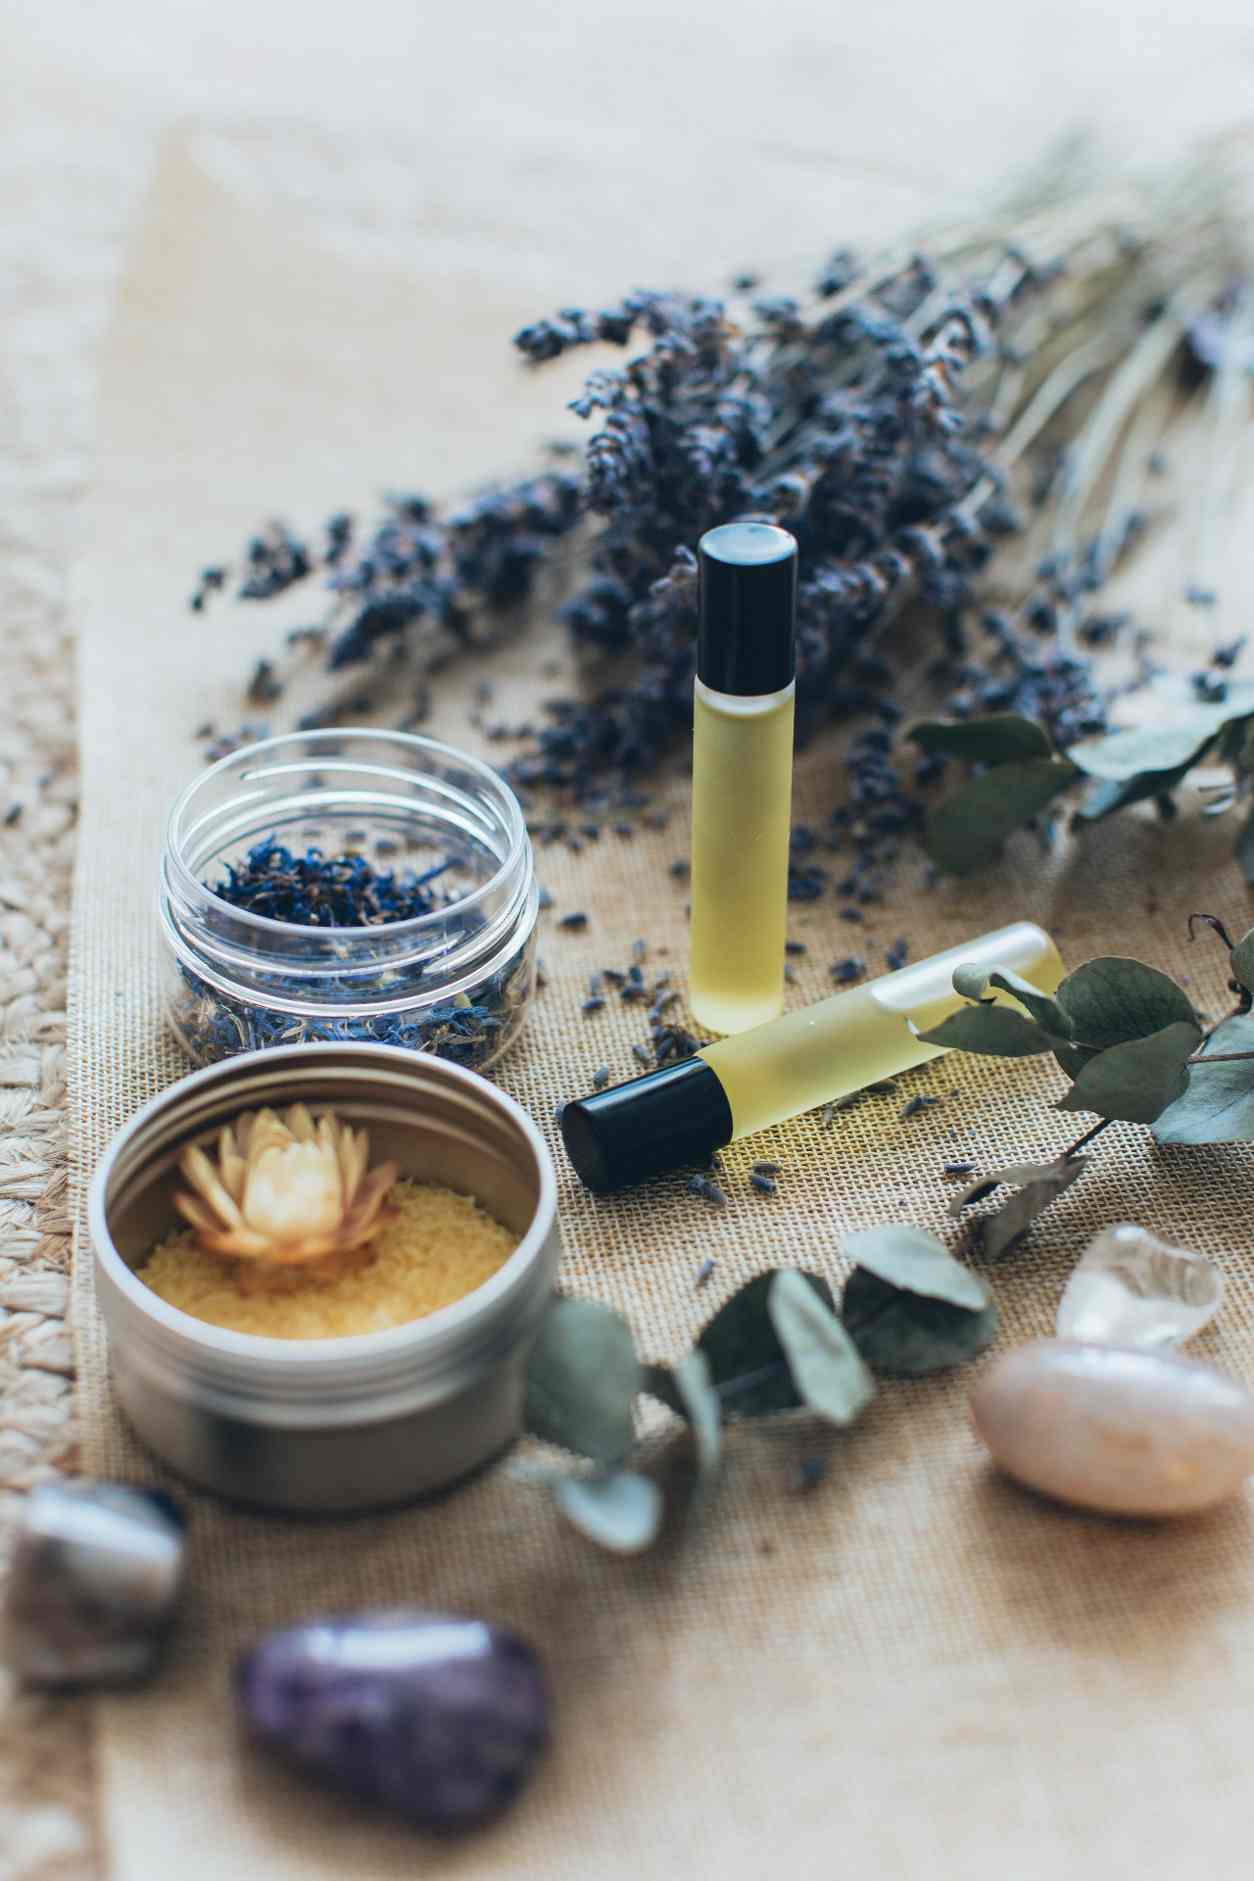 How Does Aromatherapy Reduce Stress? 4 Scents to Try